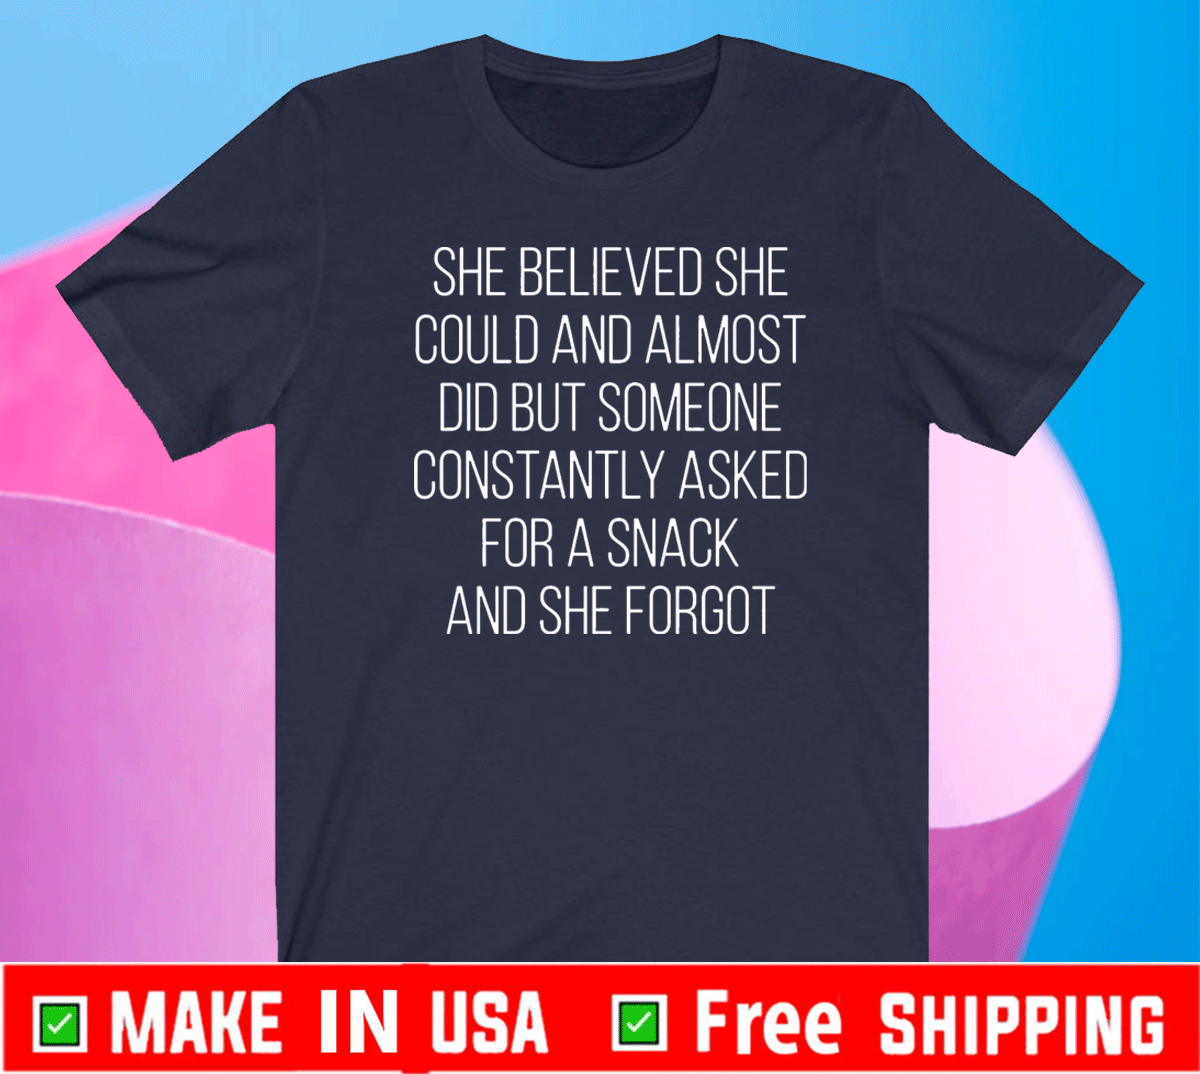 She believed she could and almost did but someone constantly asked for a snack and she forgot t-shirt